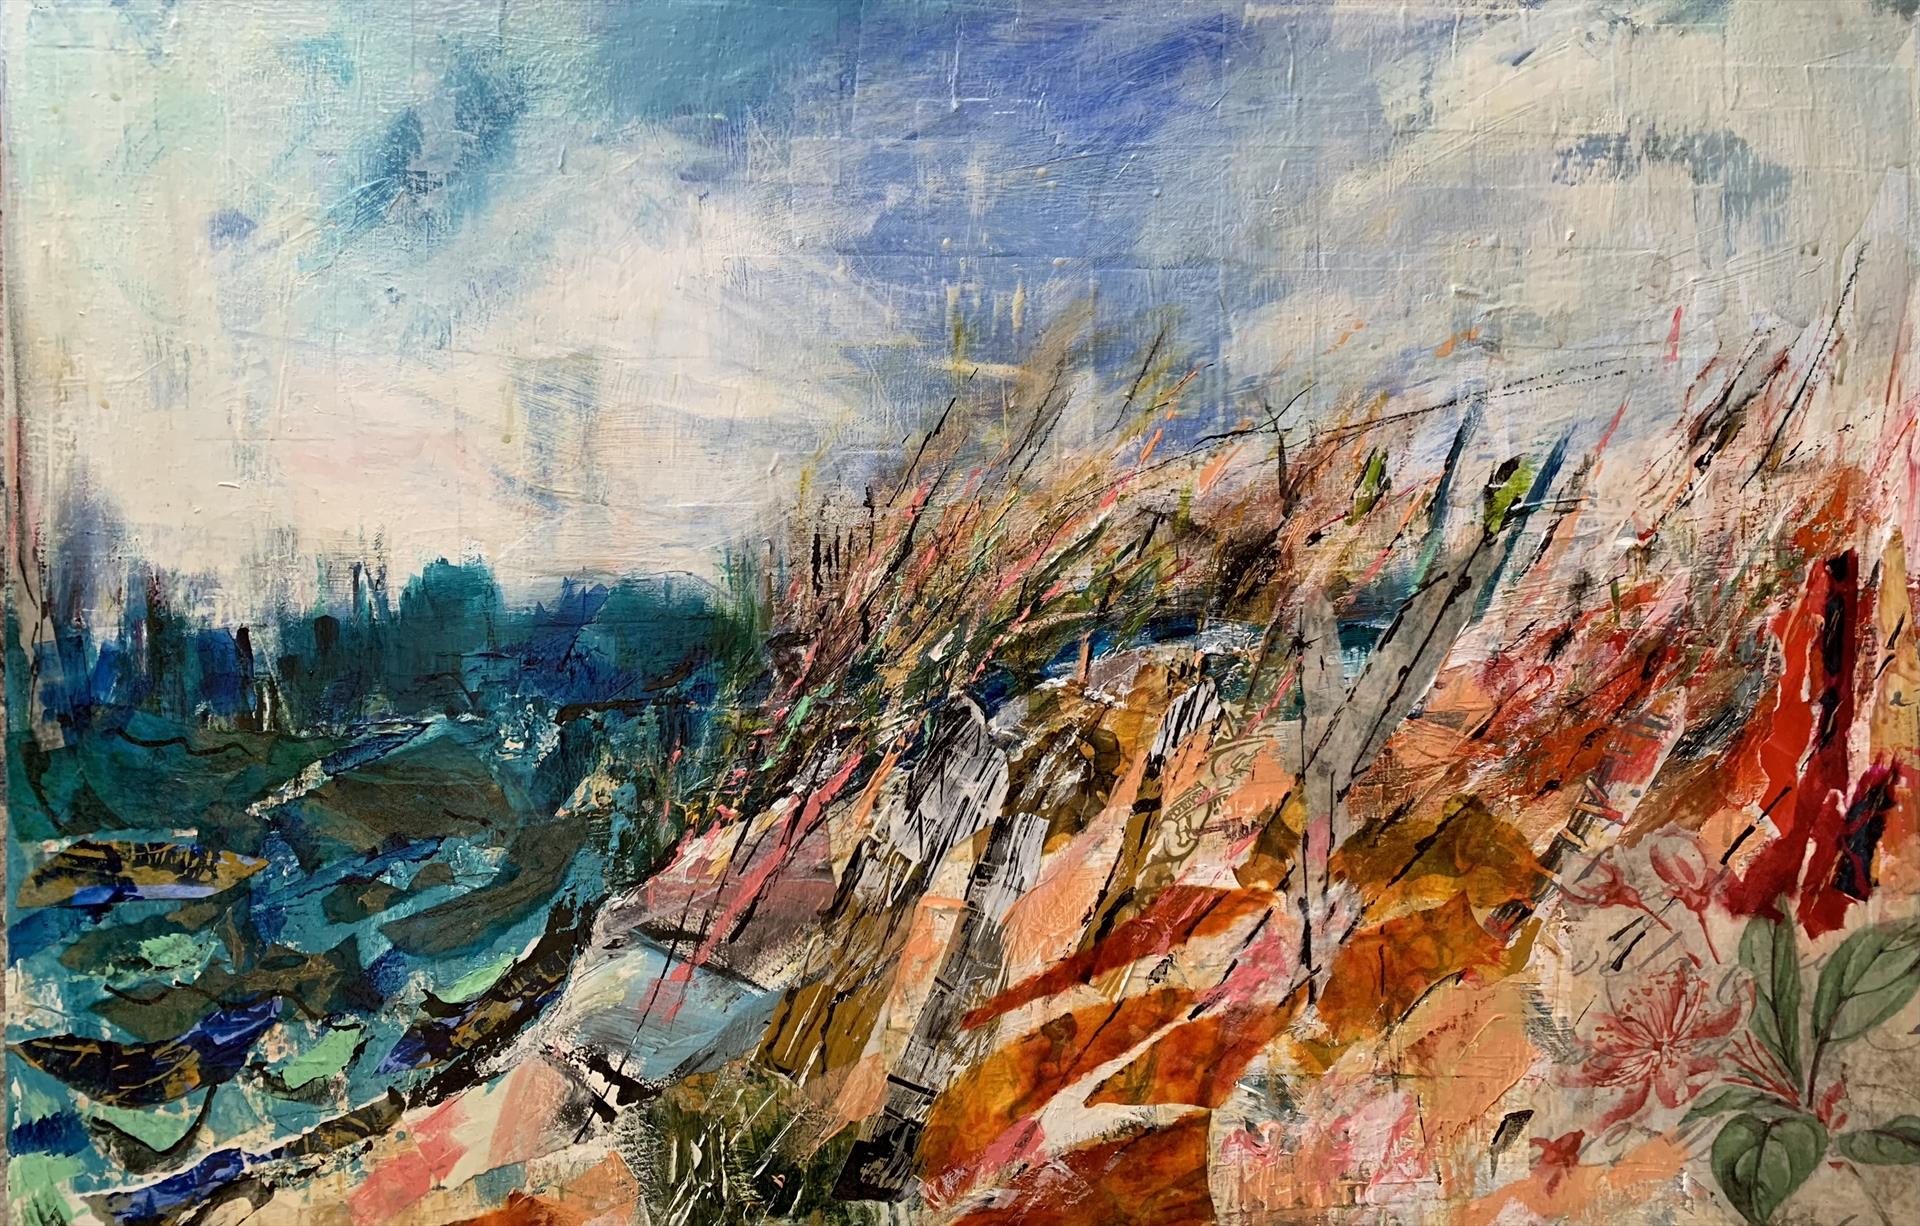 Bonny Butler - The Dunes On Fifth 24x36 Mixed Media/Collage $2200